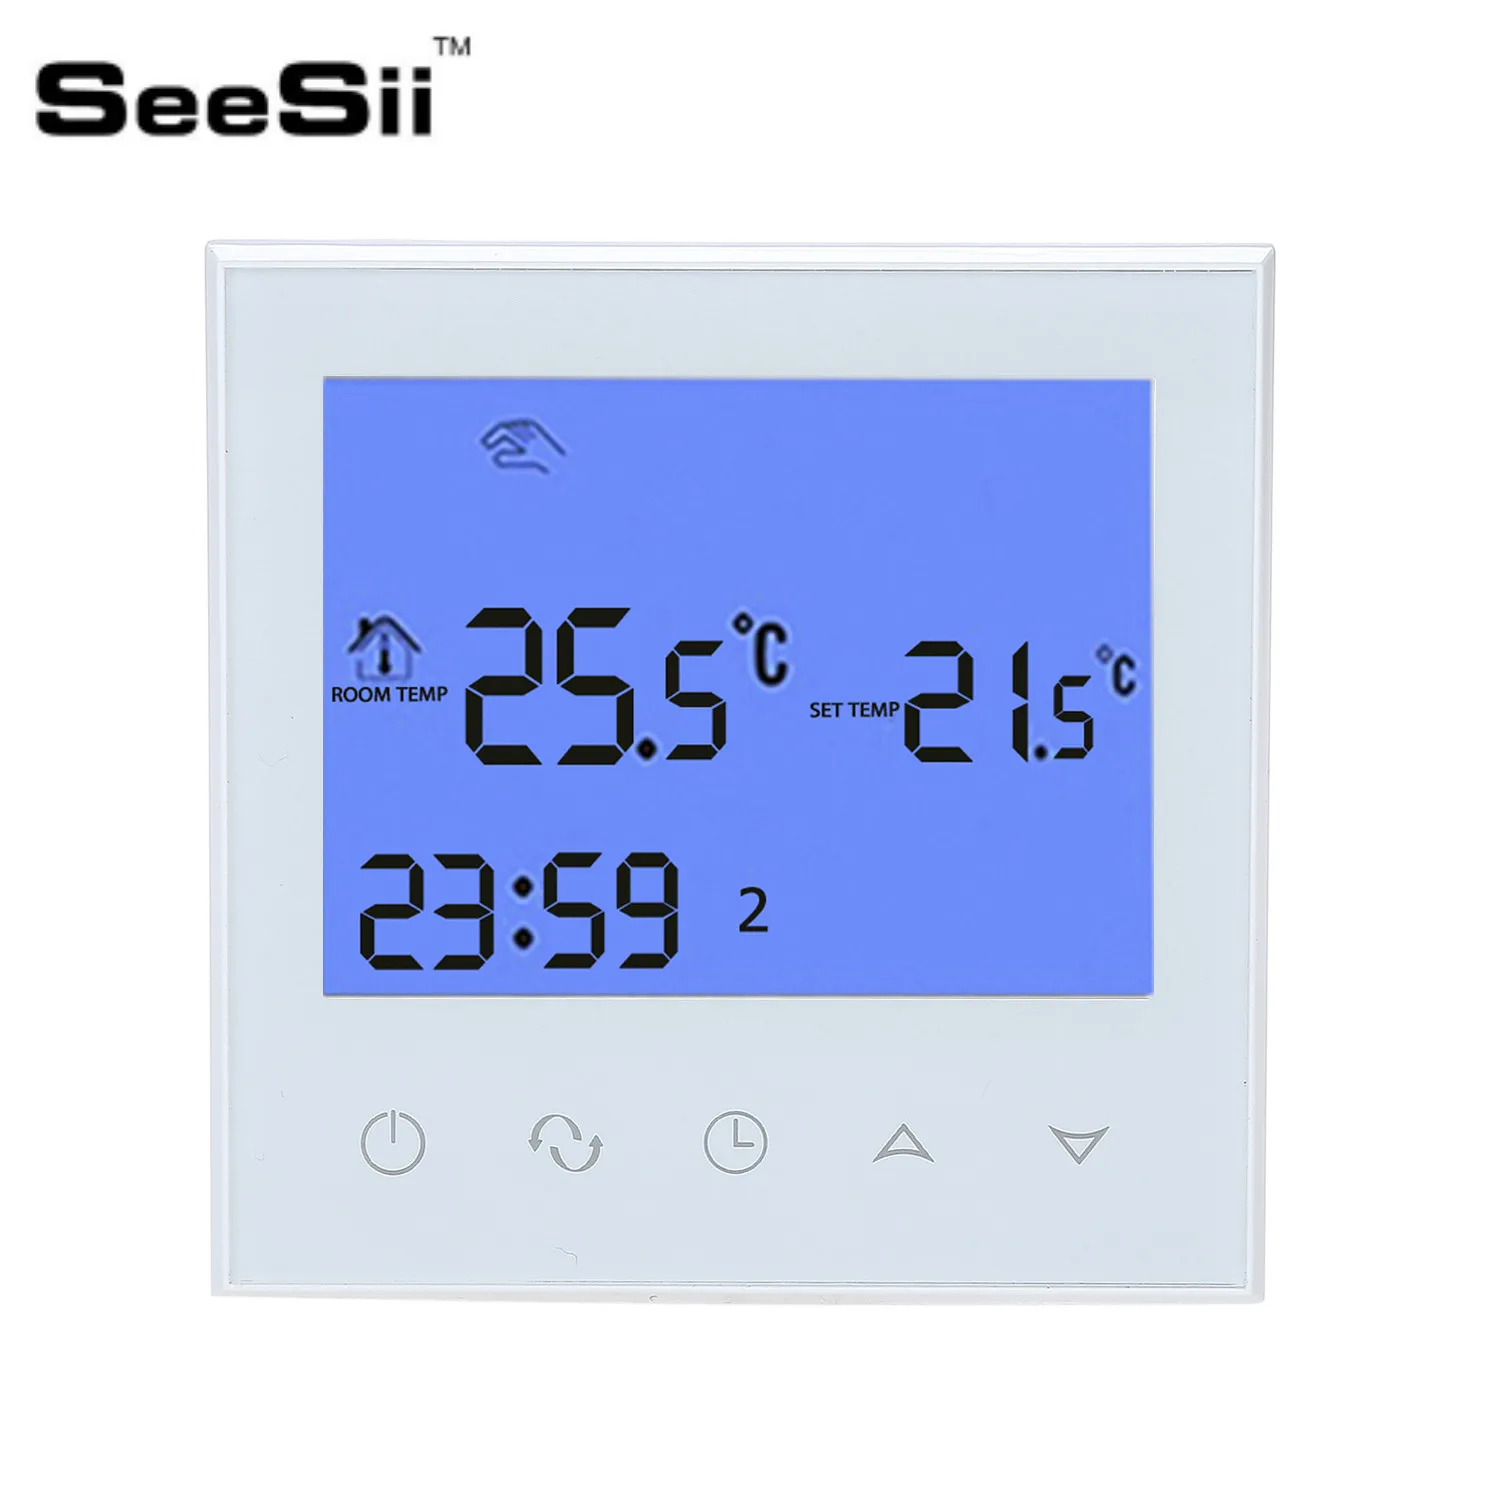 Image SeeSii Programmable Thermostat Heating WiFi LCD Touch Screen Temp Air Condition Temperature Control Underfloor 16A 230V Remote